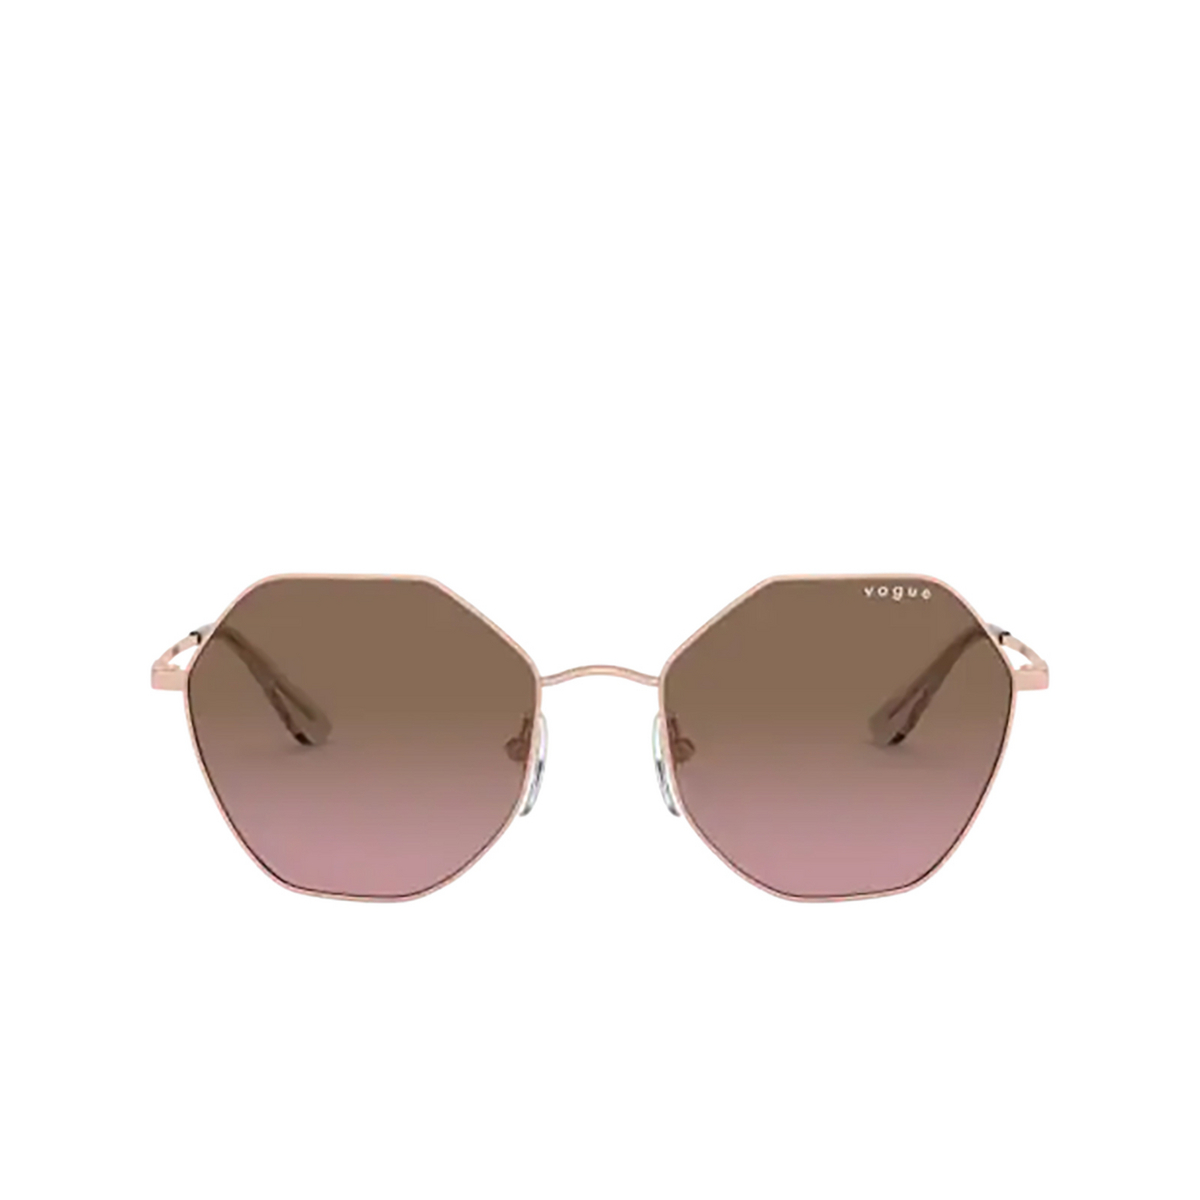 Vogue® Irregular Sunglasses: VO4180S color Rose Gold 507514 - front view.